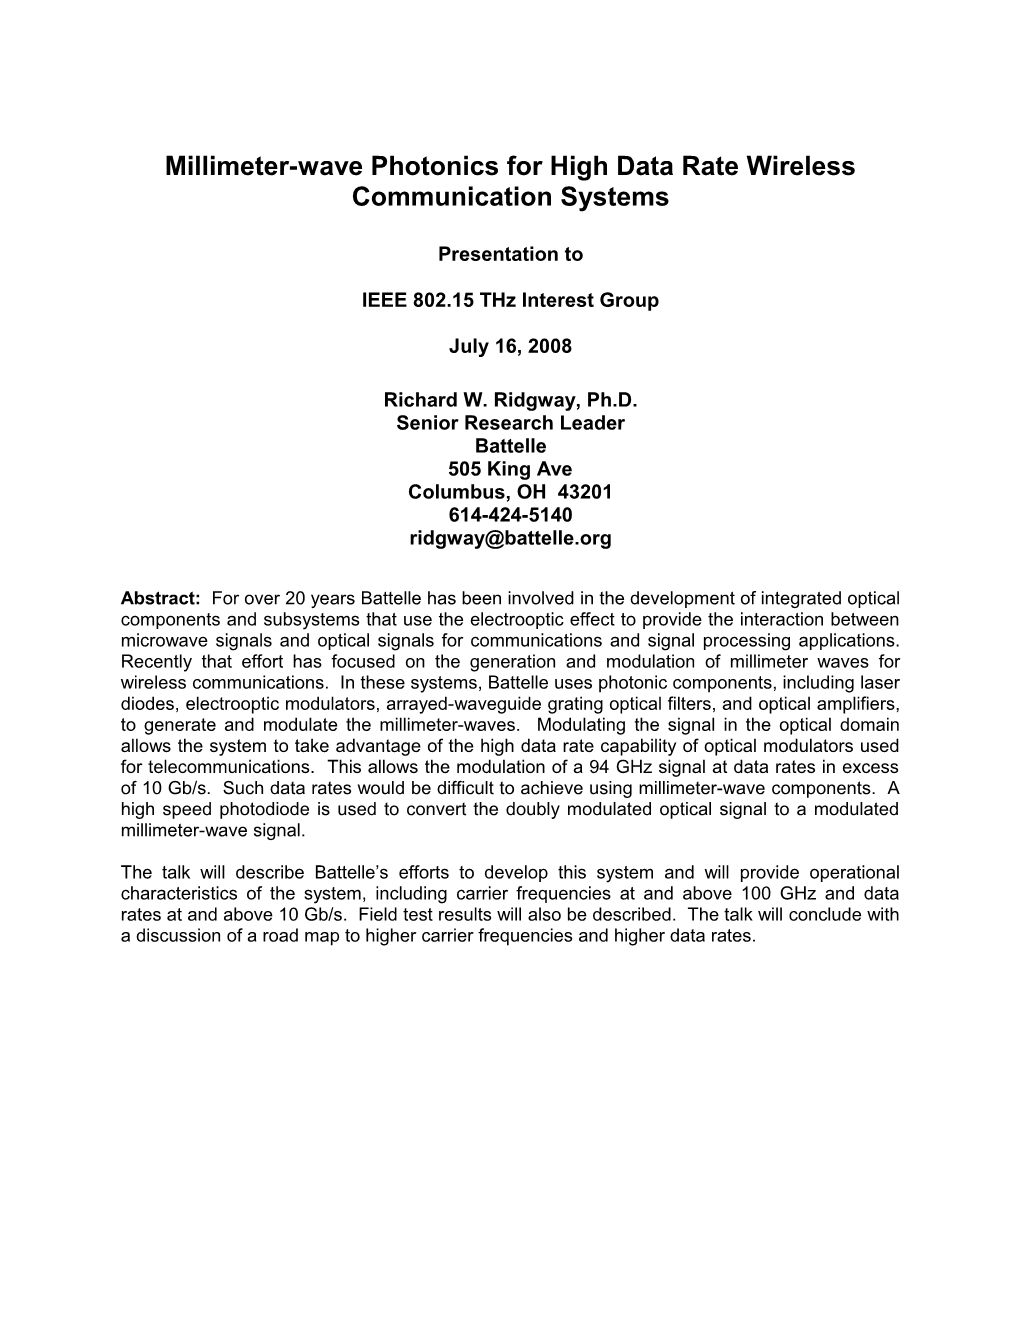 Millimeter-Wave Photonics for High Data Rate Wireless Communication Systems